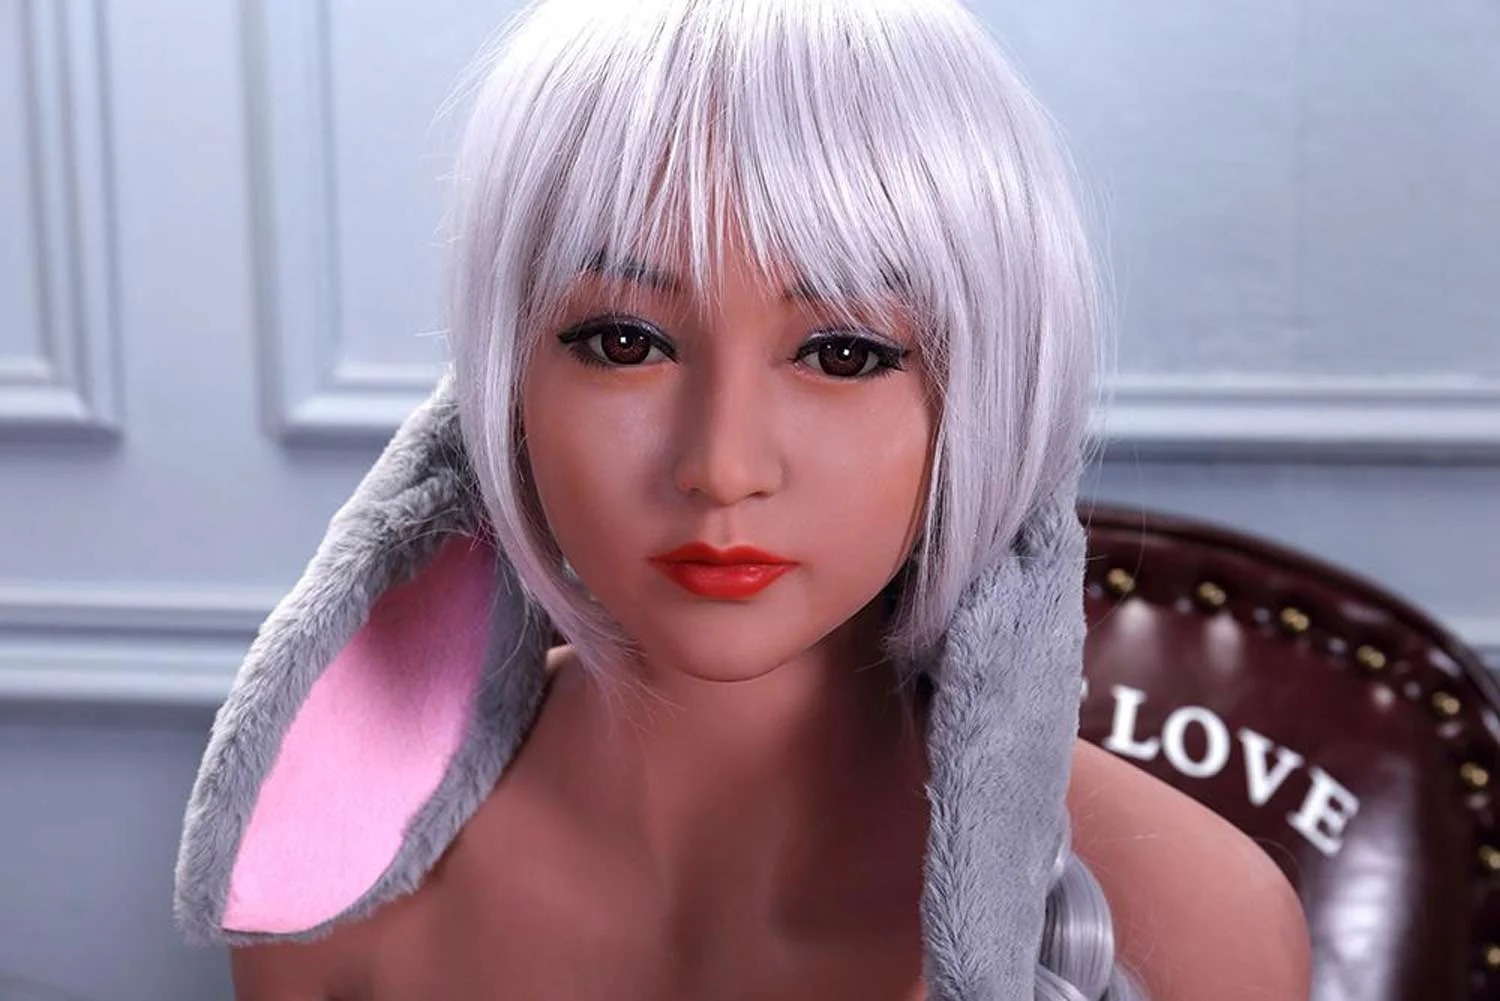 Sex doll with gray bunny ears